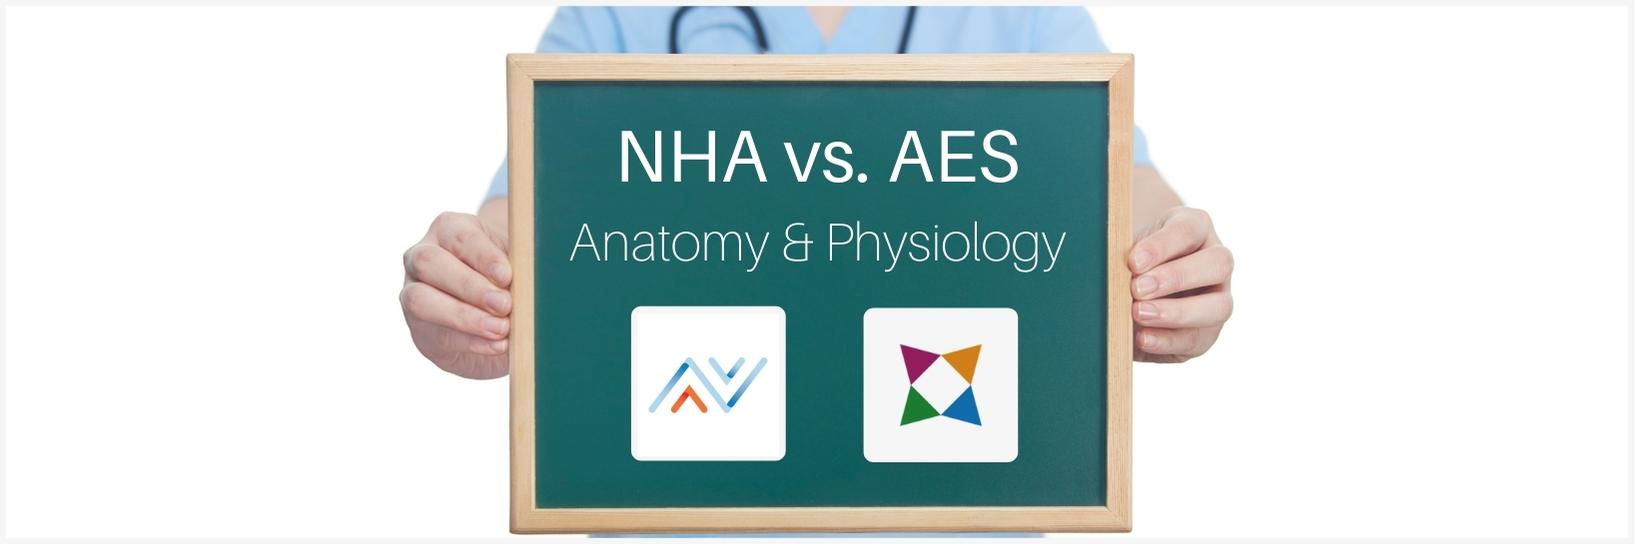 NHA vs. AES: Which is Better for Teaching Anatomy and Physiology?